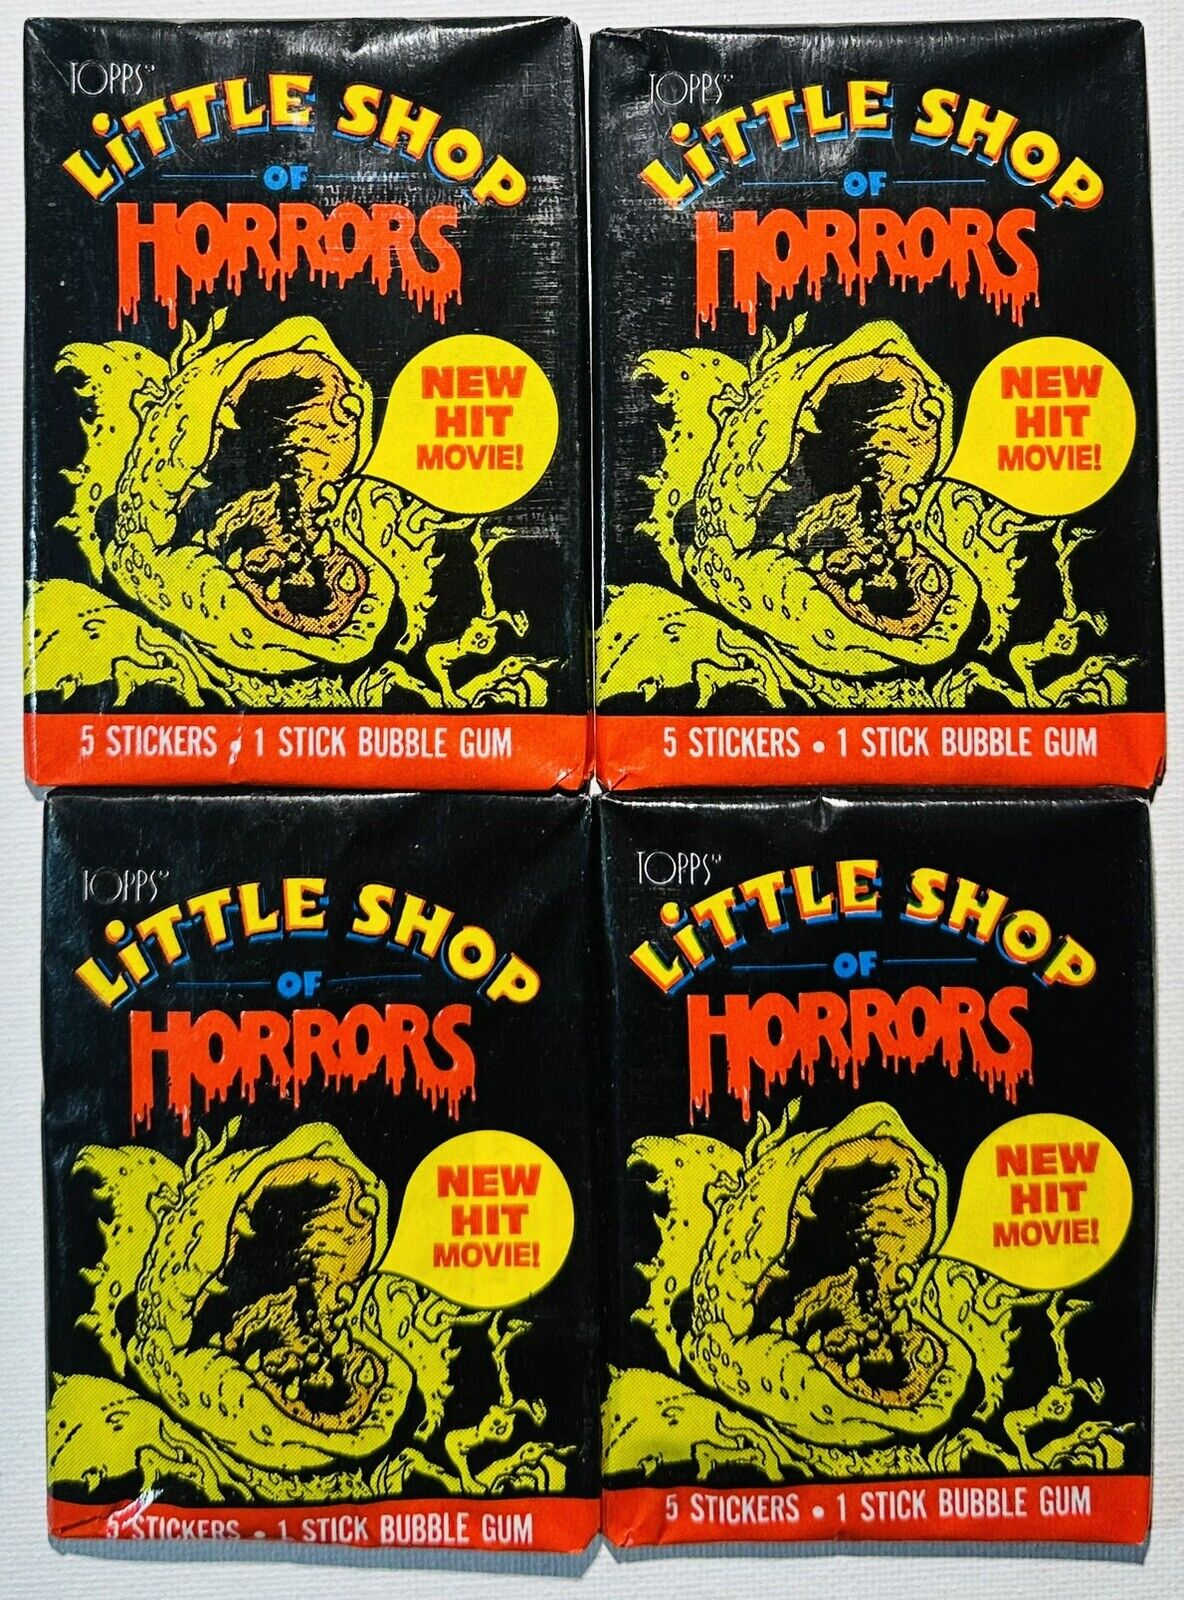 1986 Topps LITTLE SHOP OF HORRORS Unopened Vintage Wax Pack